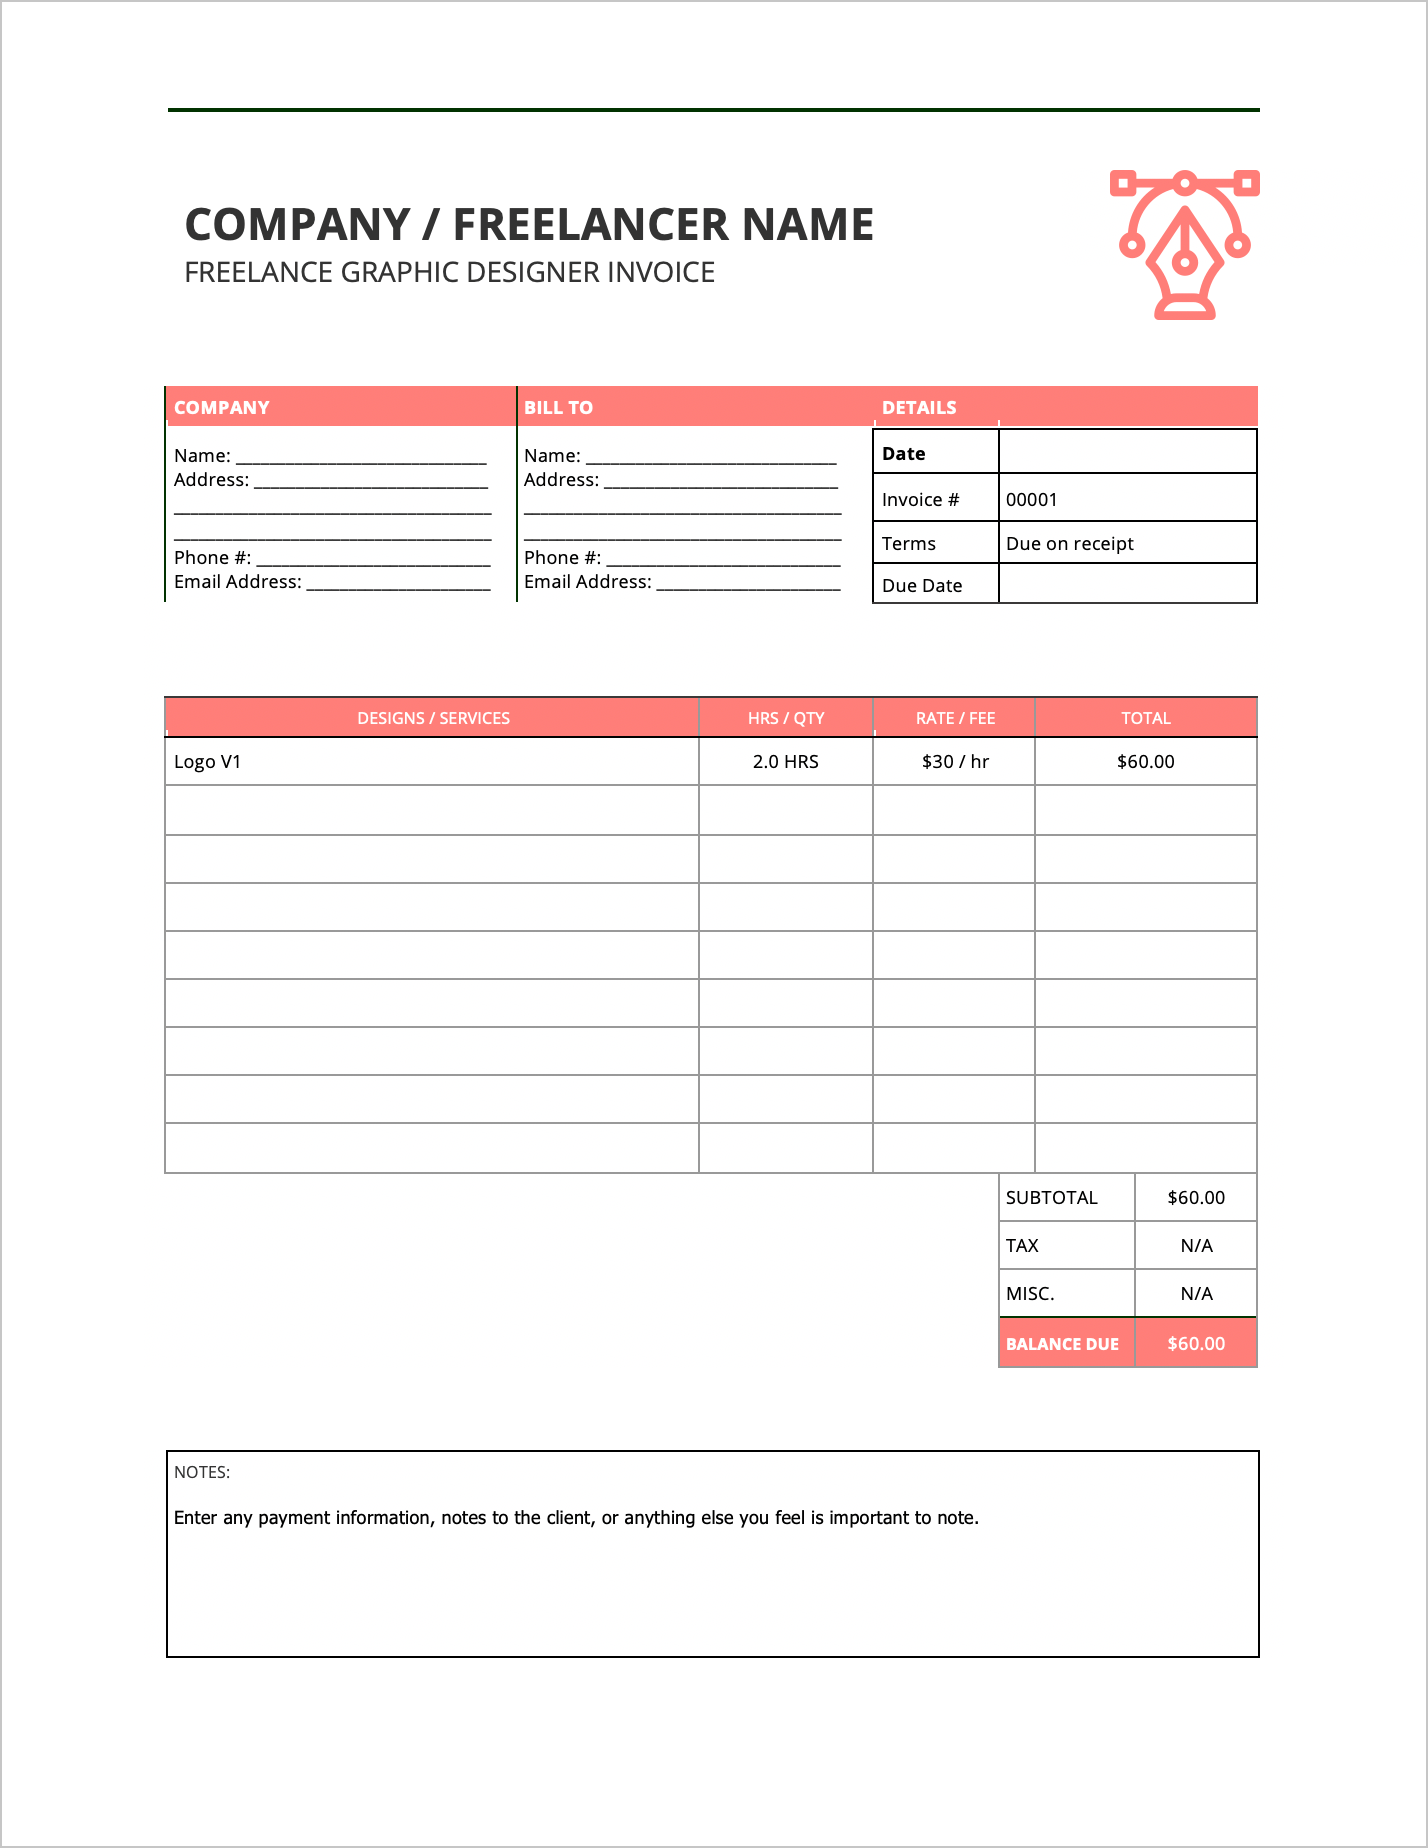 Free Freelance Graphic Designer Invoice Template  PDF  WORD  EXCEL Intended For Graphic Design Invoice Template Word